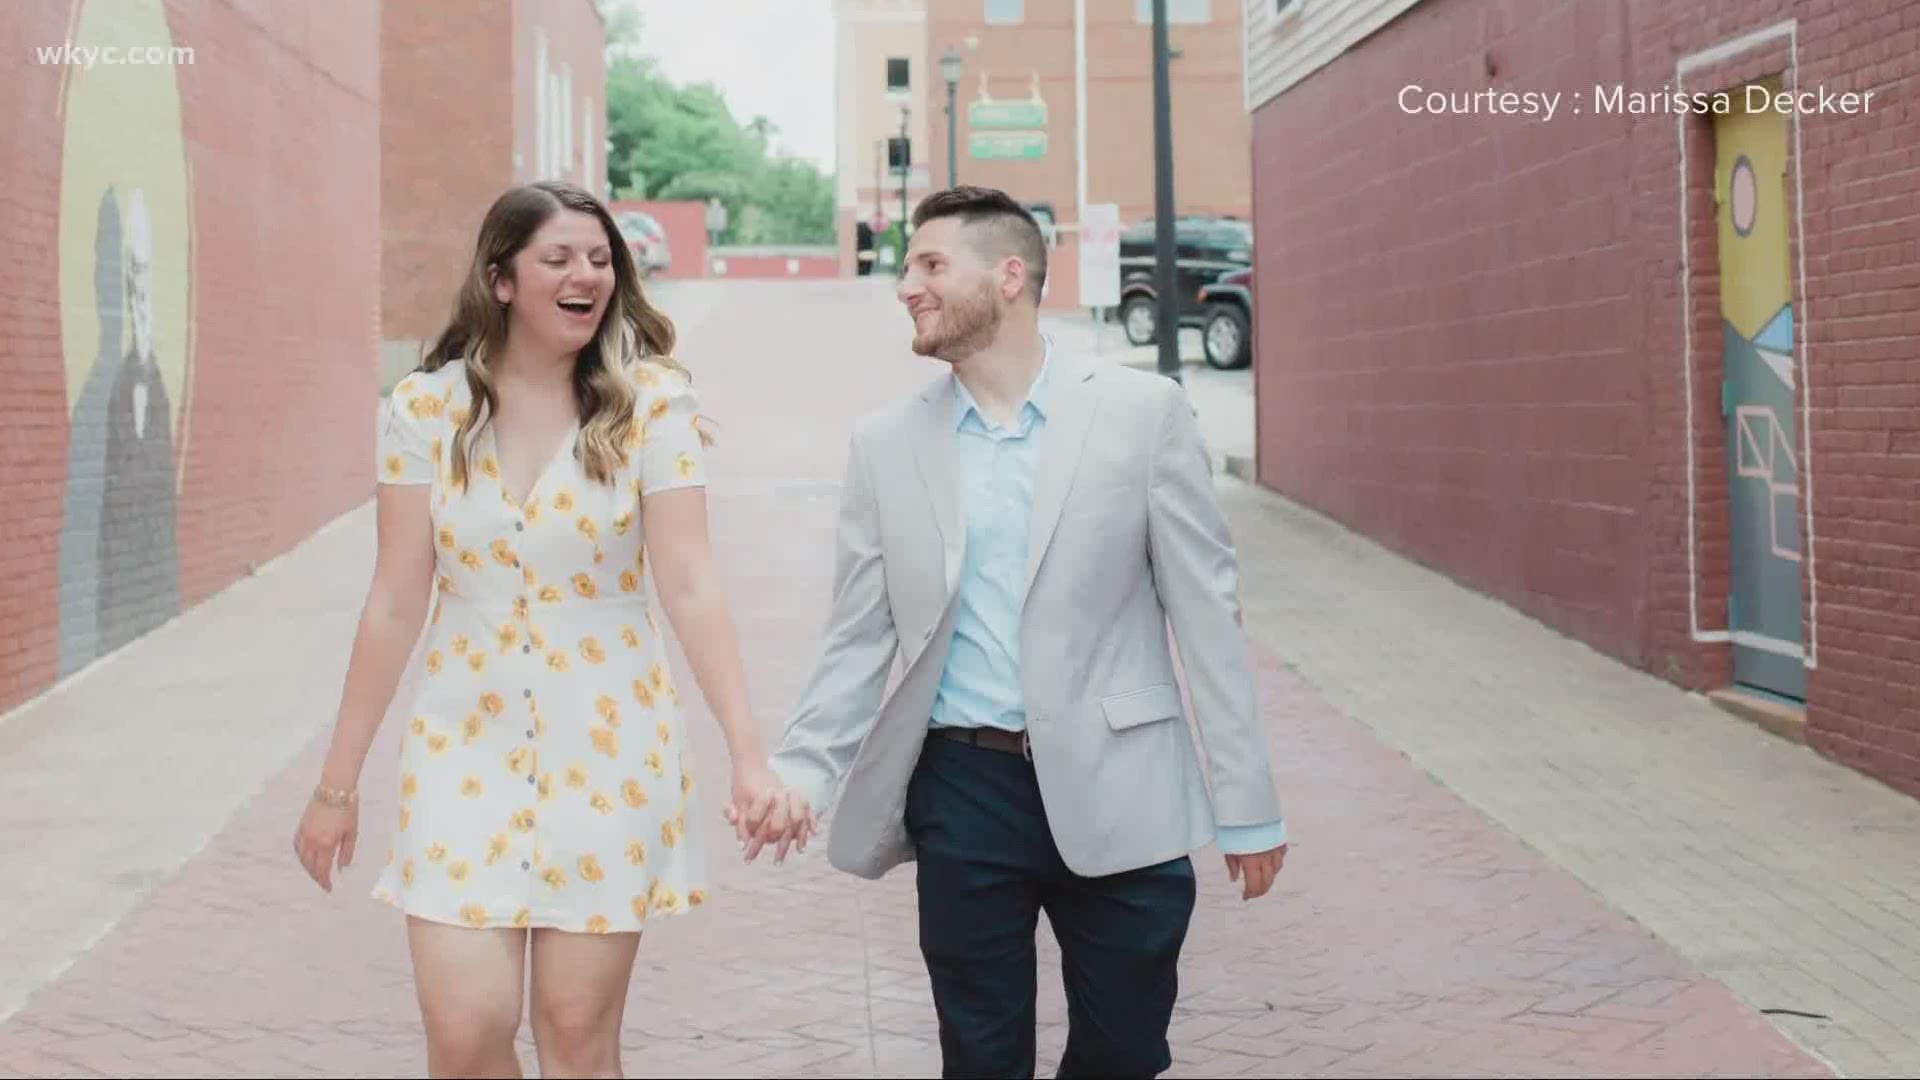 A couple's love brought together friends and family for a performance none of them will ever forget.
Tiffany Tarpley bring us this heartwarming story.